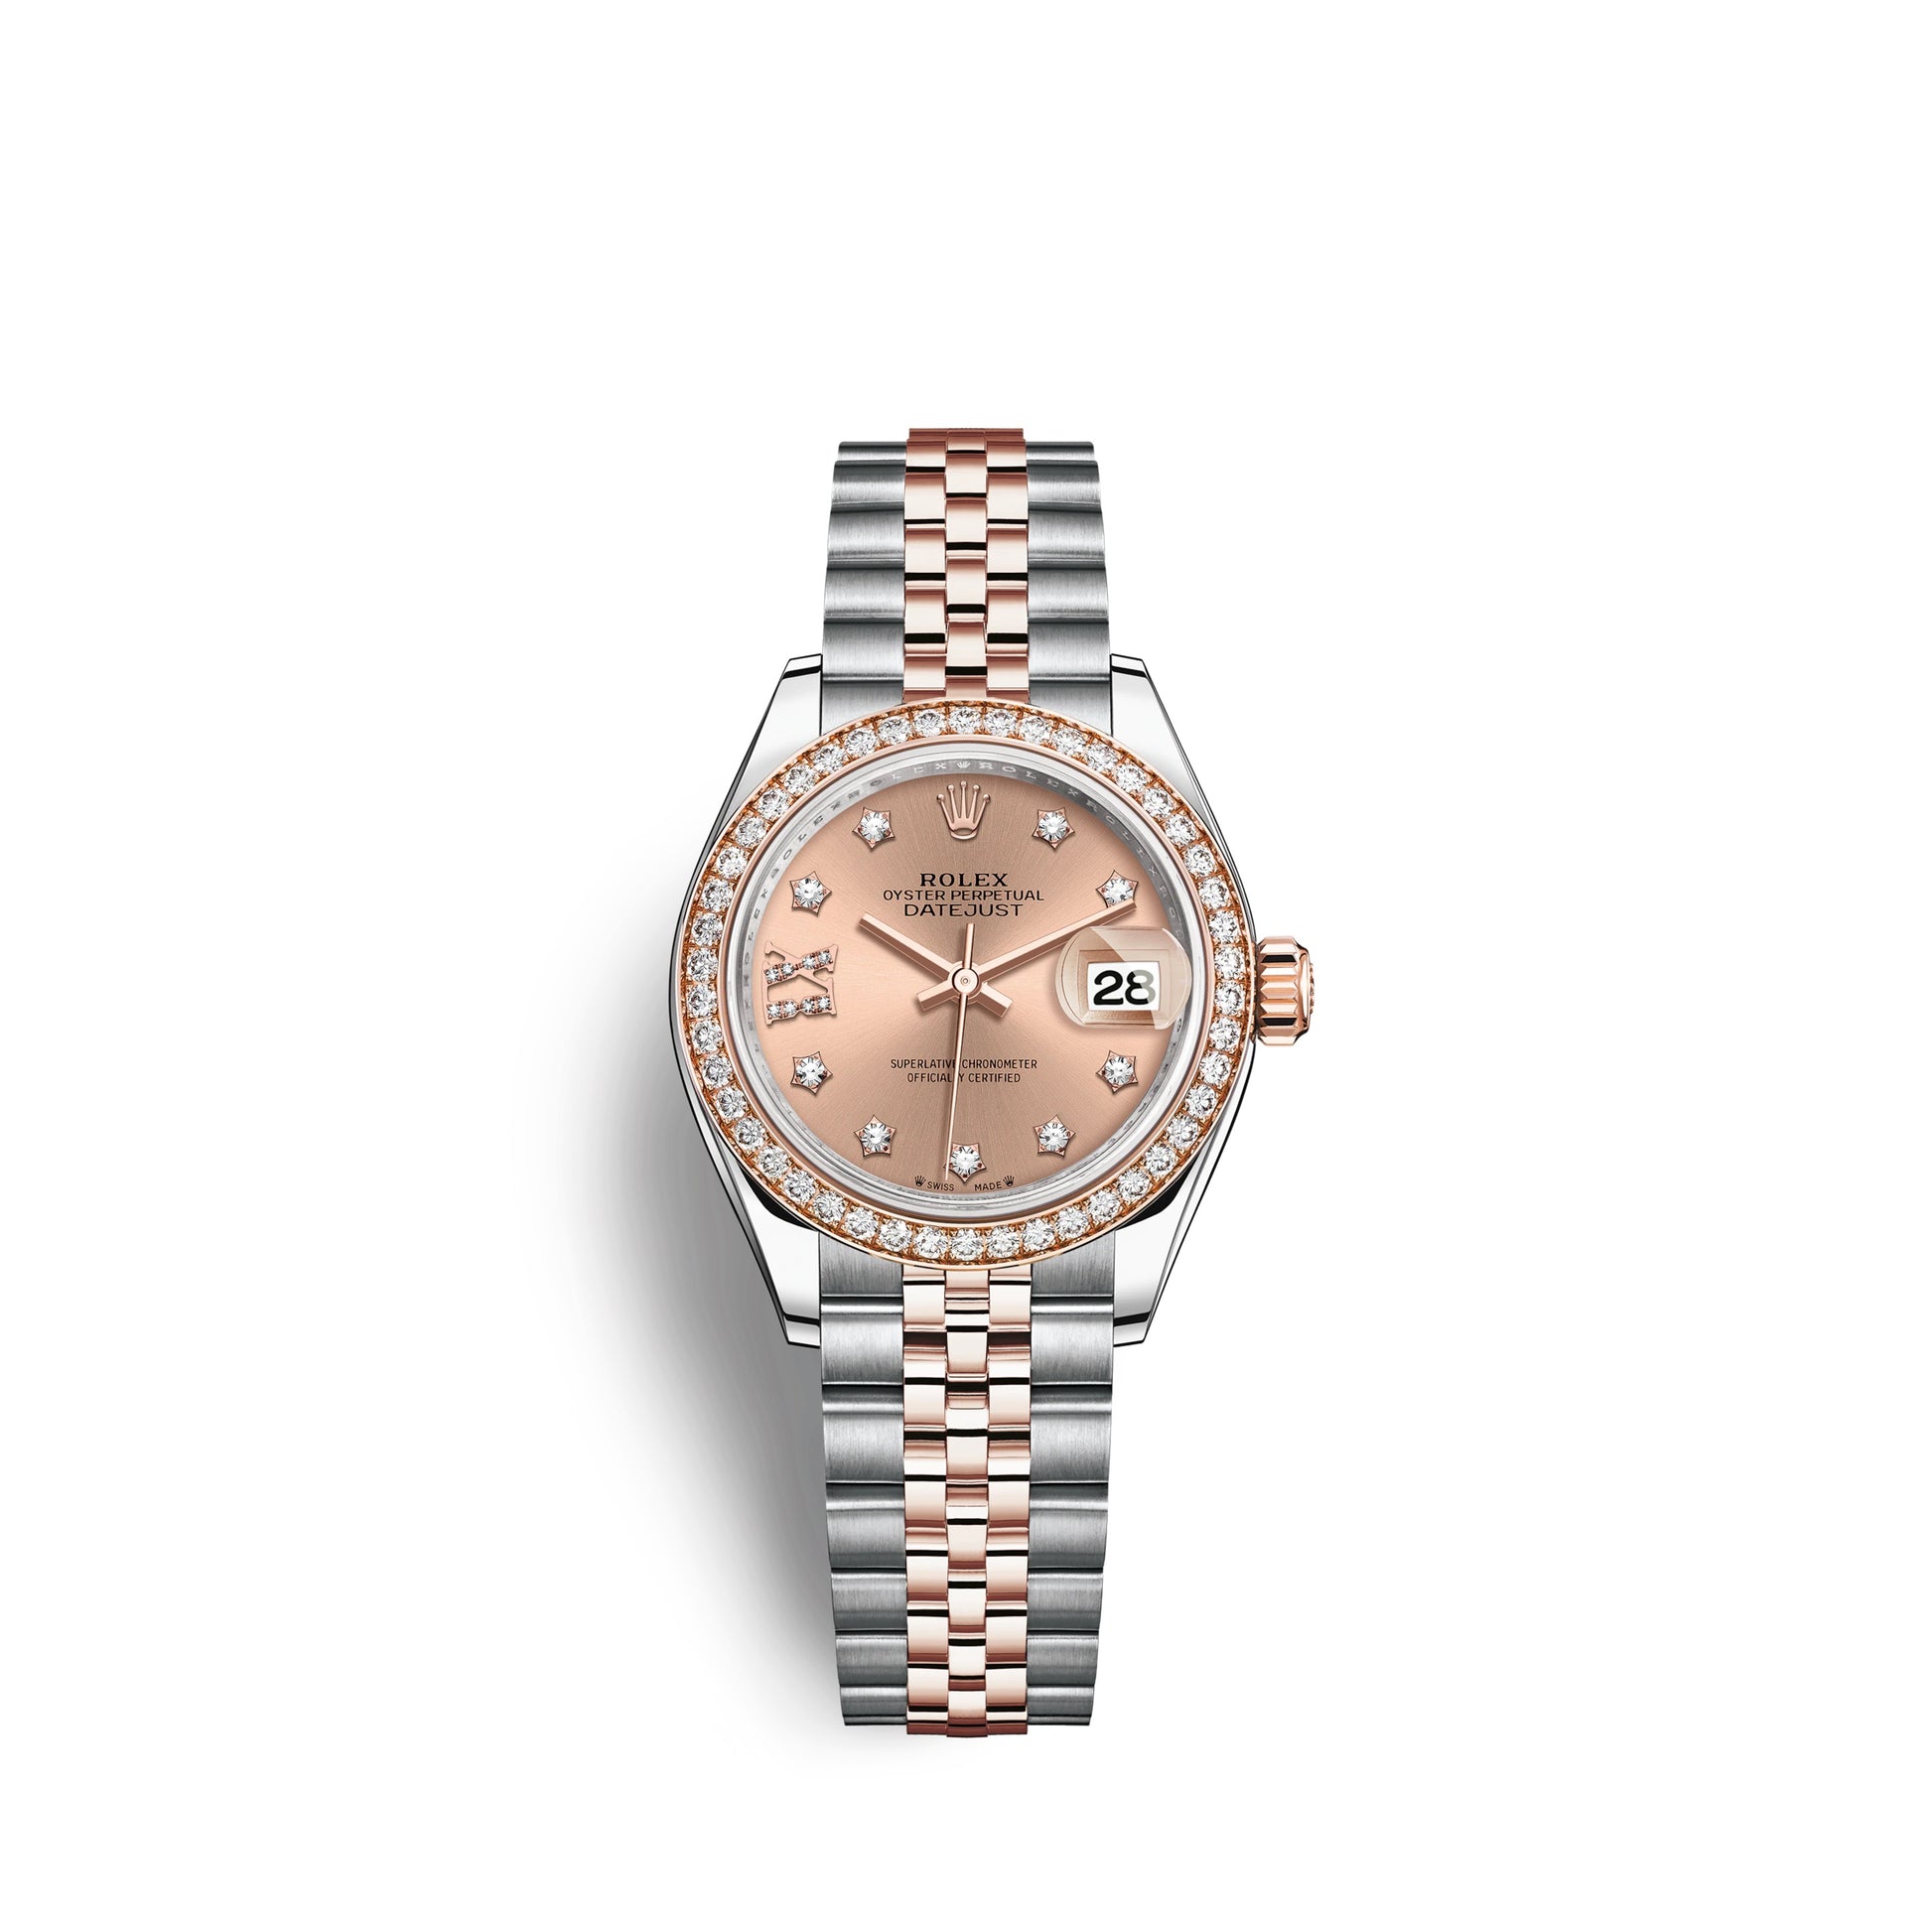 Rolex Lady-Datejust 28, Oystersteel and 18k Everose Gold, Ref# 279381RBR-0027